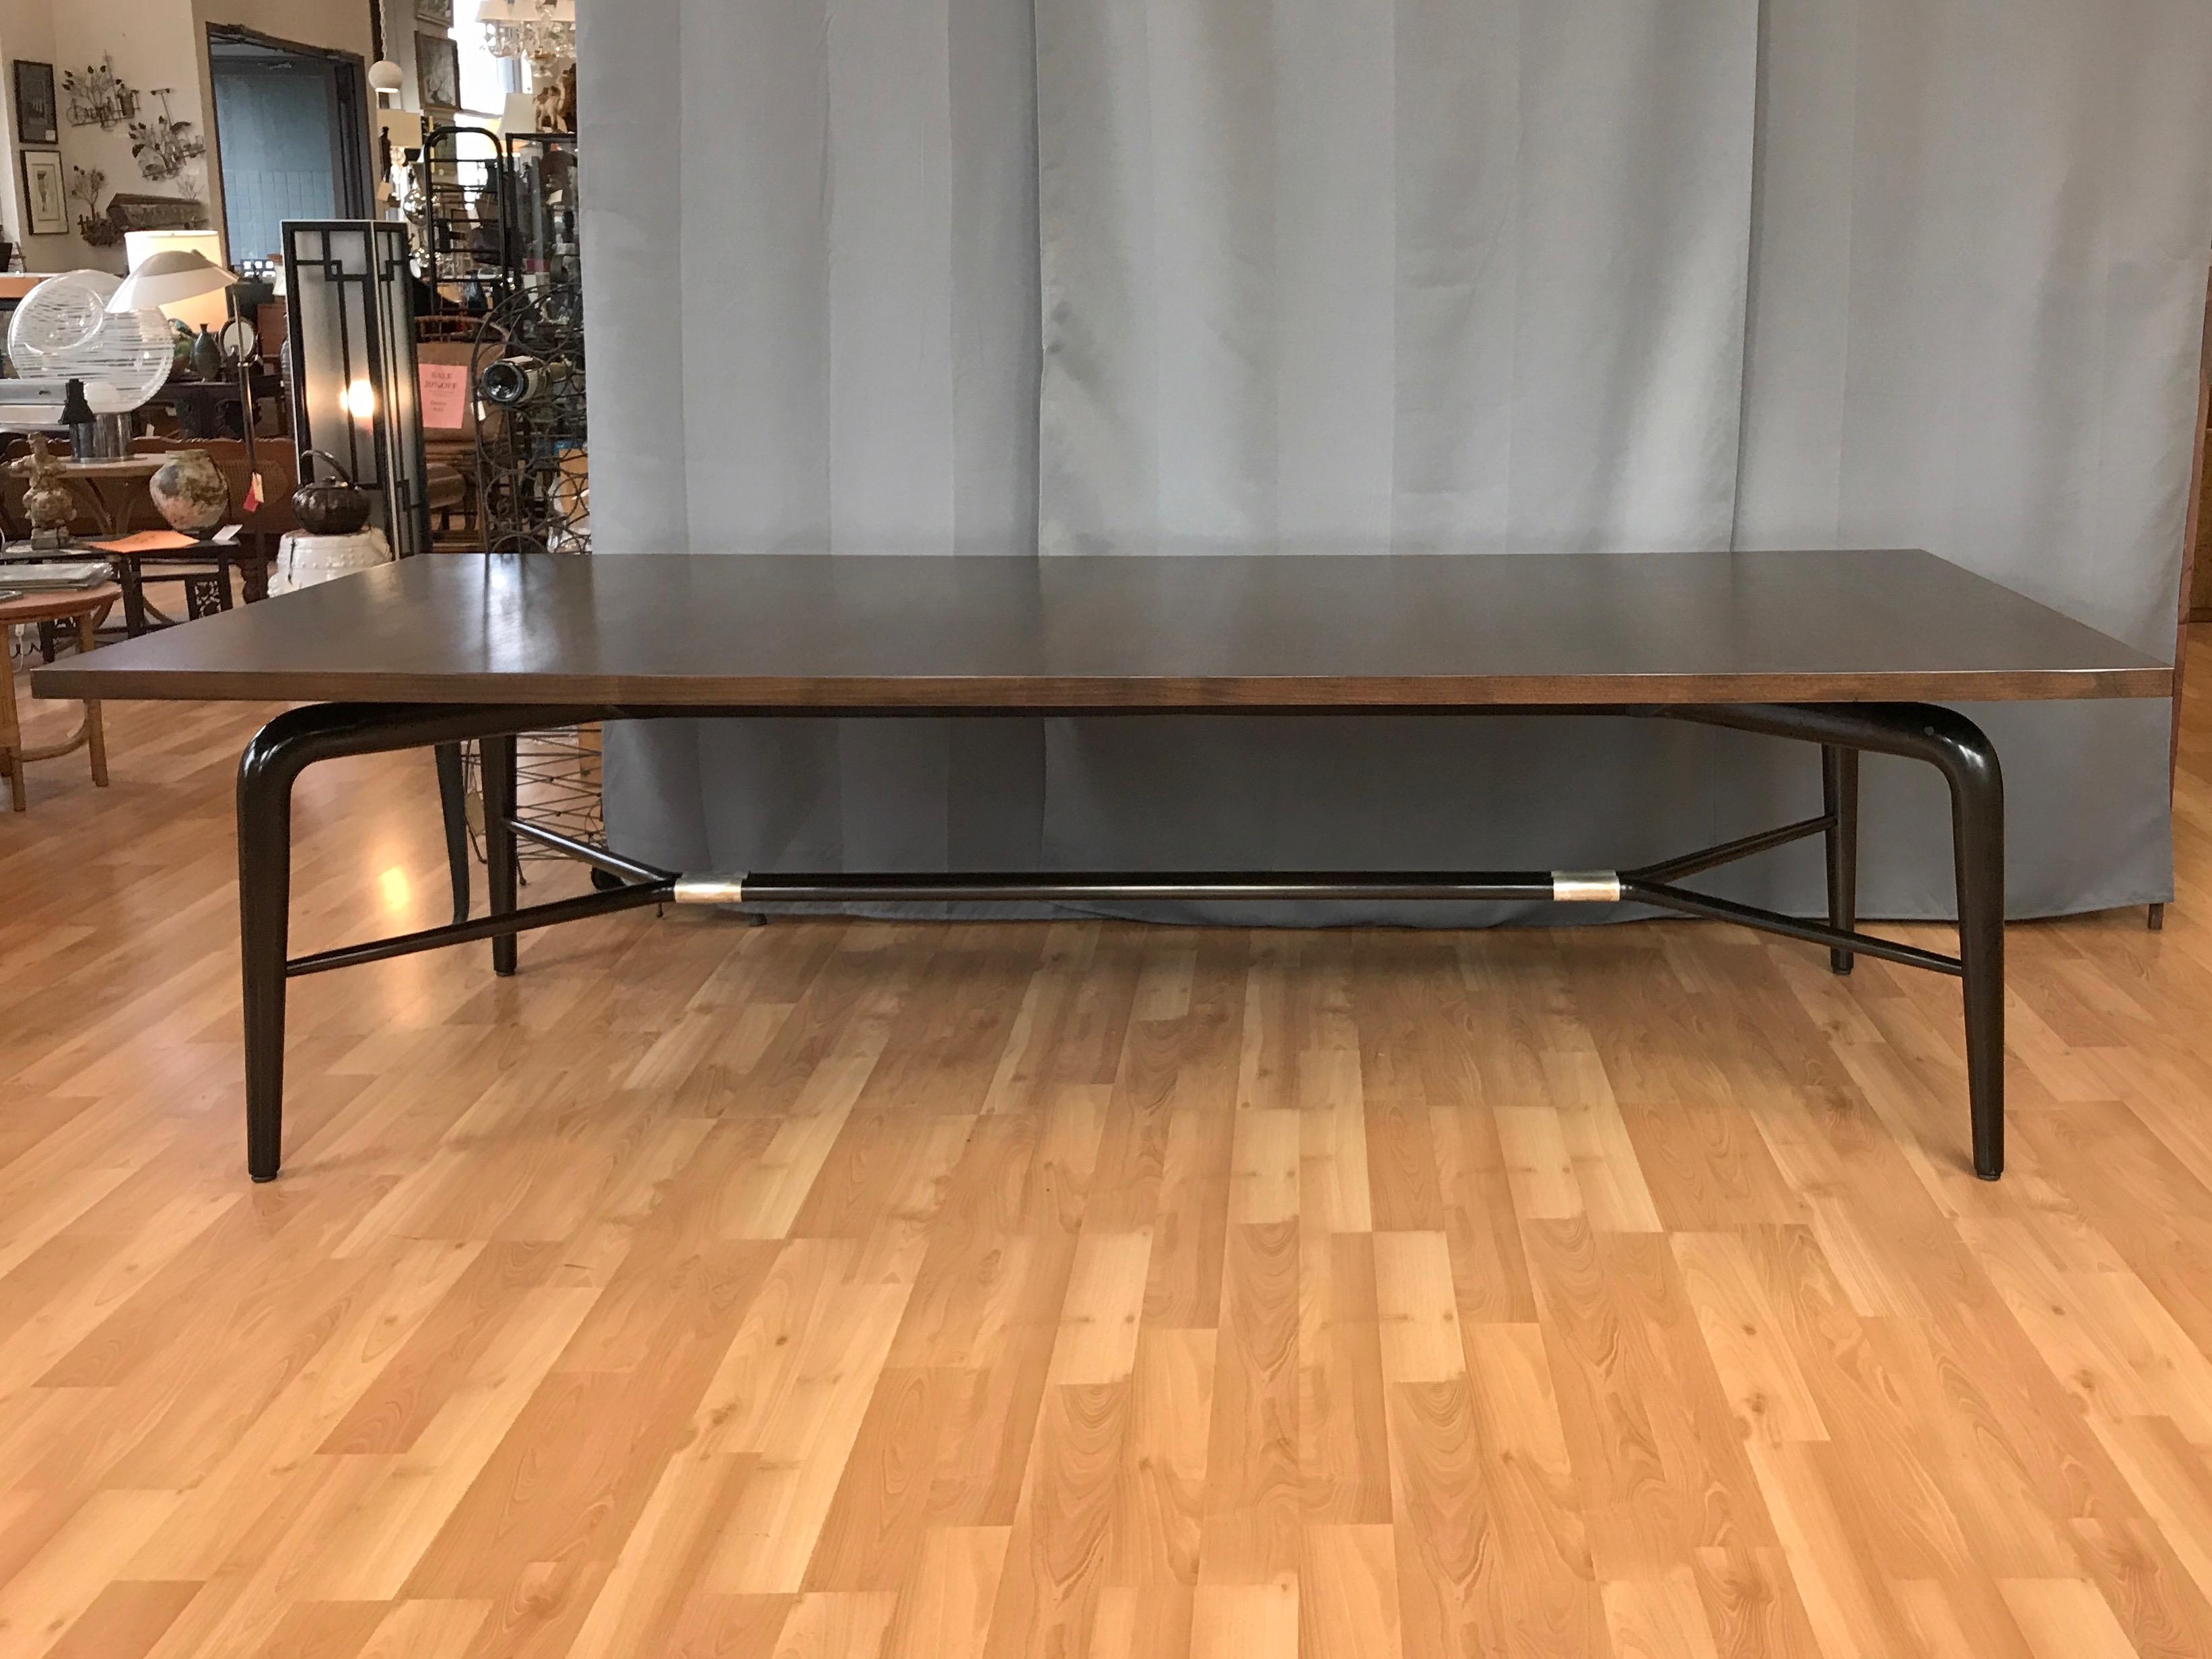 An uncommonly monumental midcentury walnut dining or conference table by Maurice Bailey for Monteverdi-Young of Beverley Hills, California.

Exceptionally handsome and expansive statement piece has a freshly refinished espresso brown satin top,